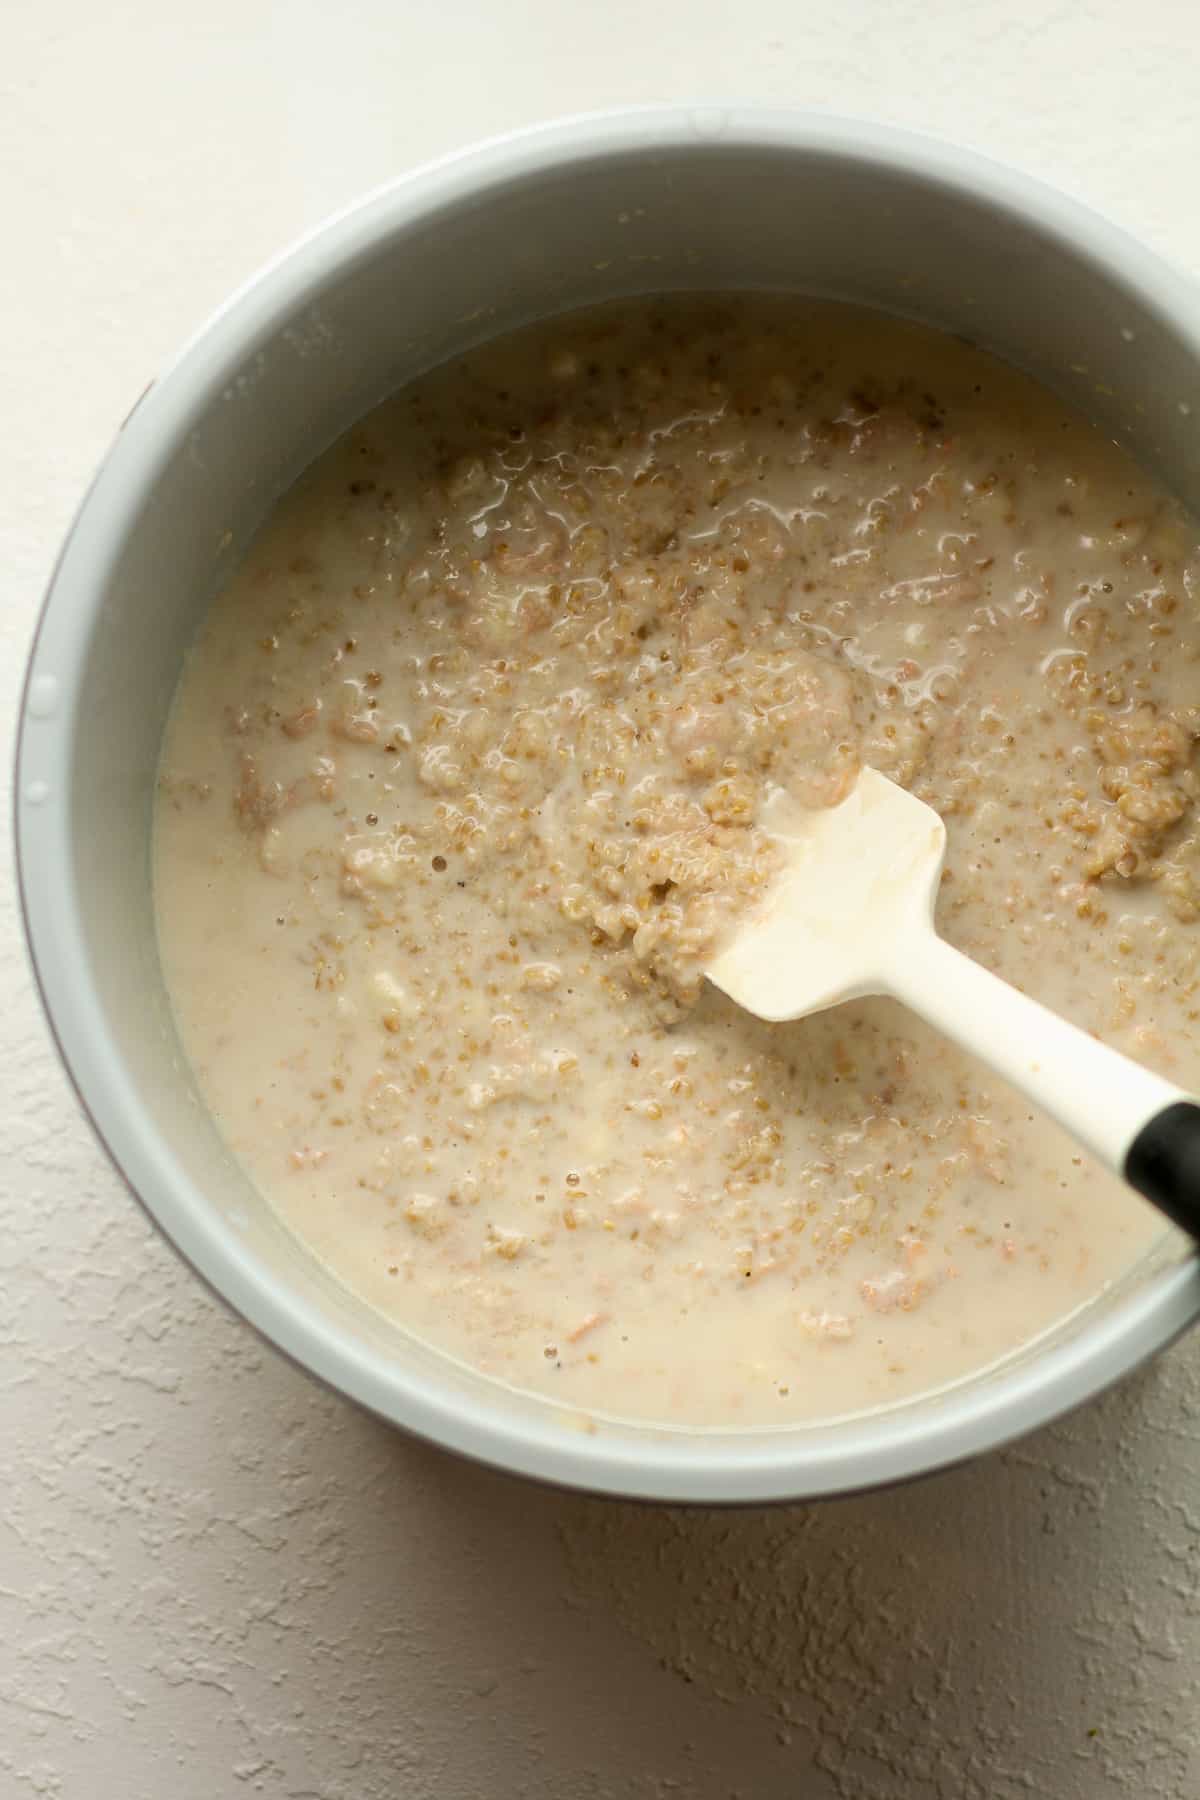 The steel cut oats with liquids added.